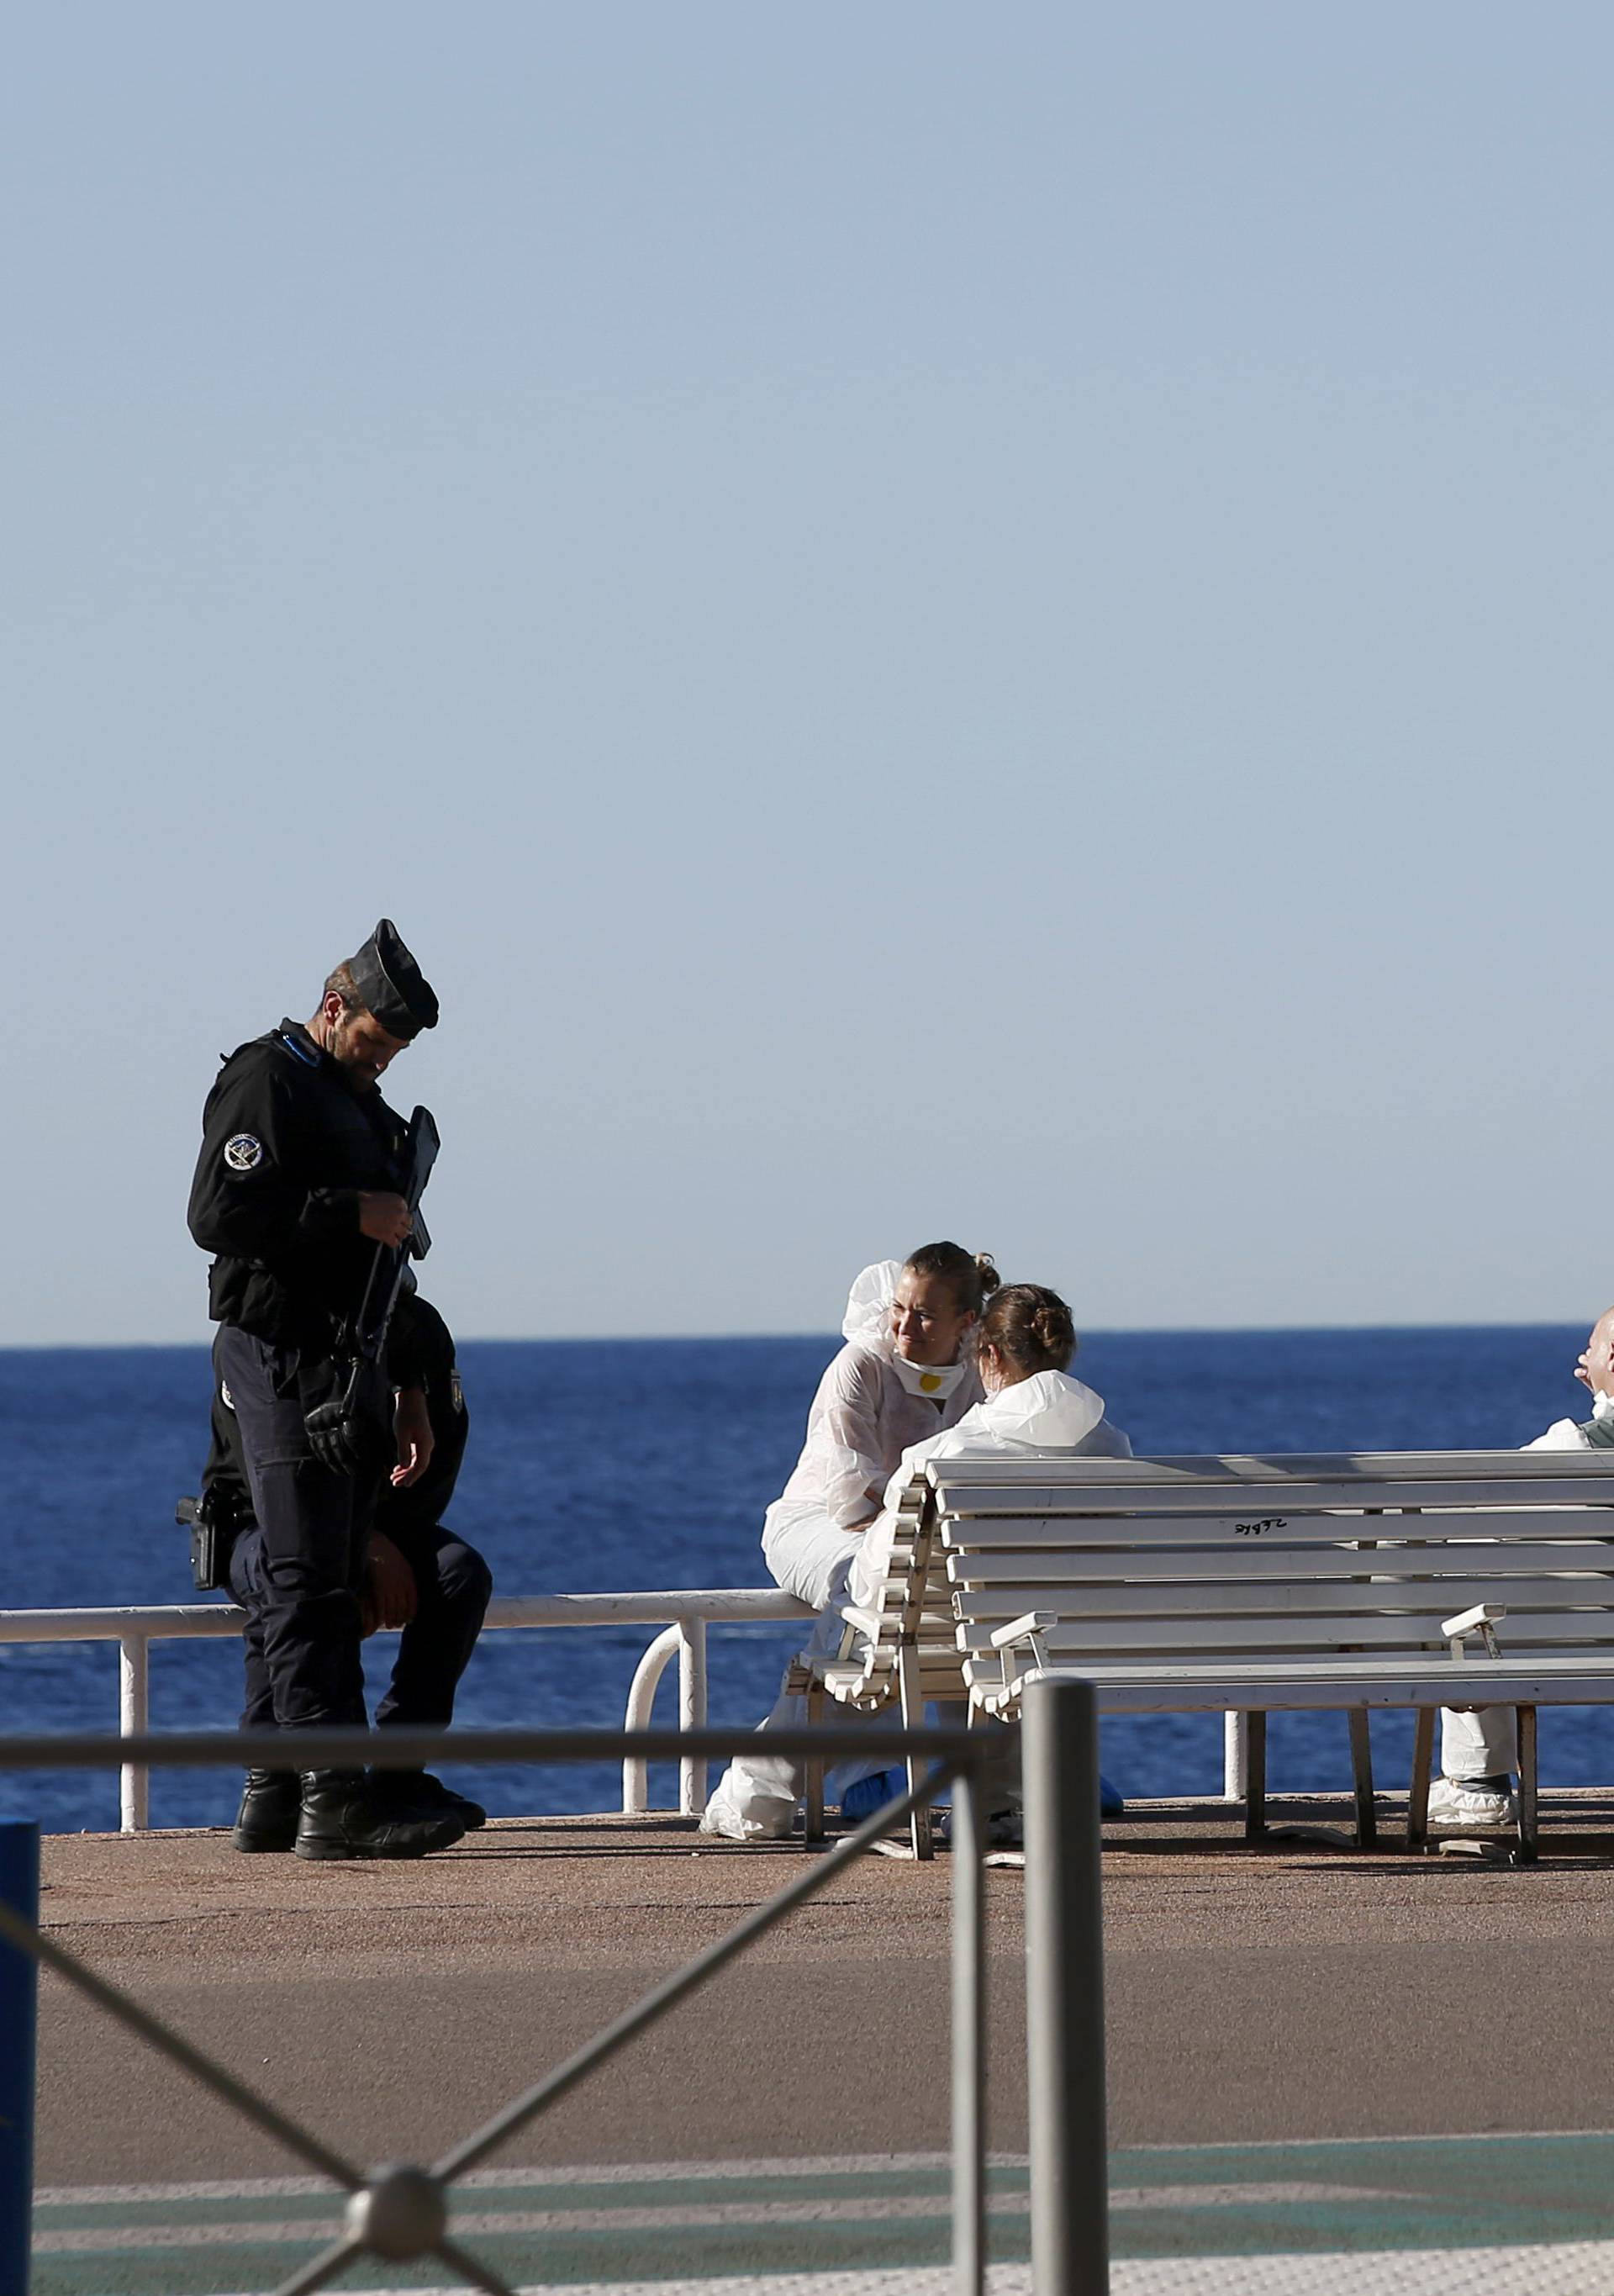 French police and investigators gather on the beachfront as a French Navy ship patrols the day after a truck ran into a crowd at high speed killing scores celebrating the Bastille Day July 14 national holiday on the Promenade des Anglais in Nice